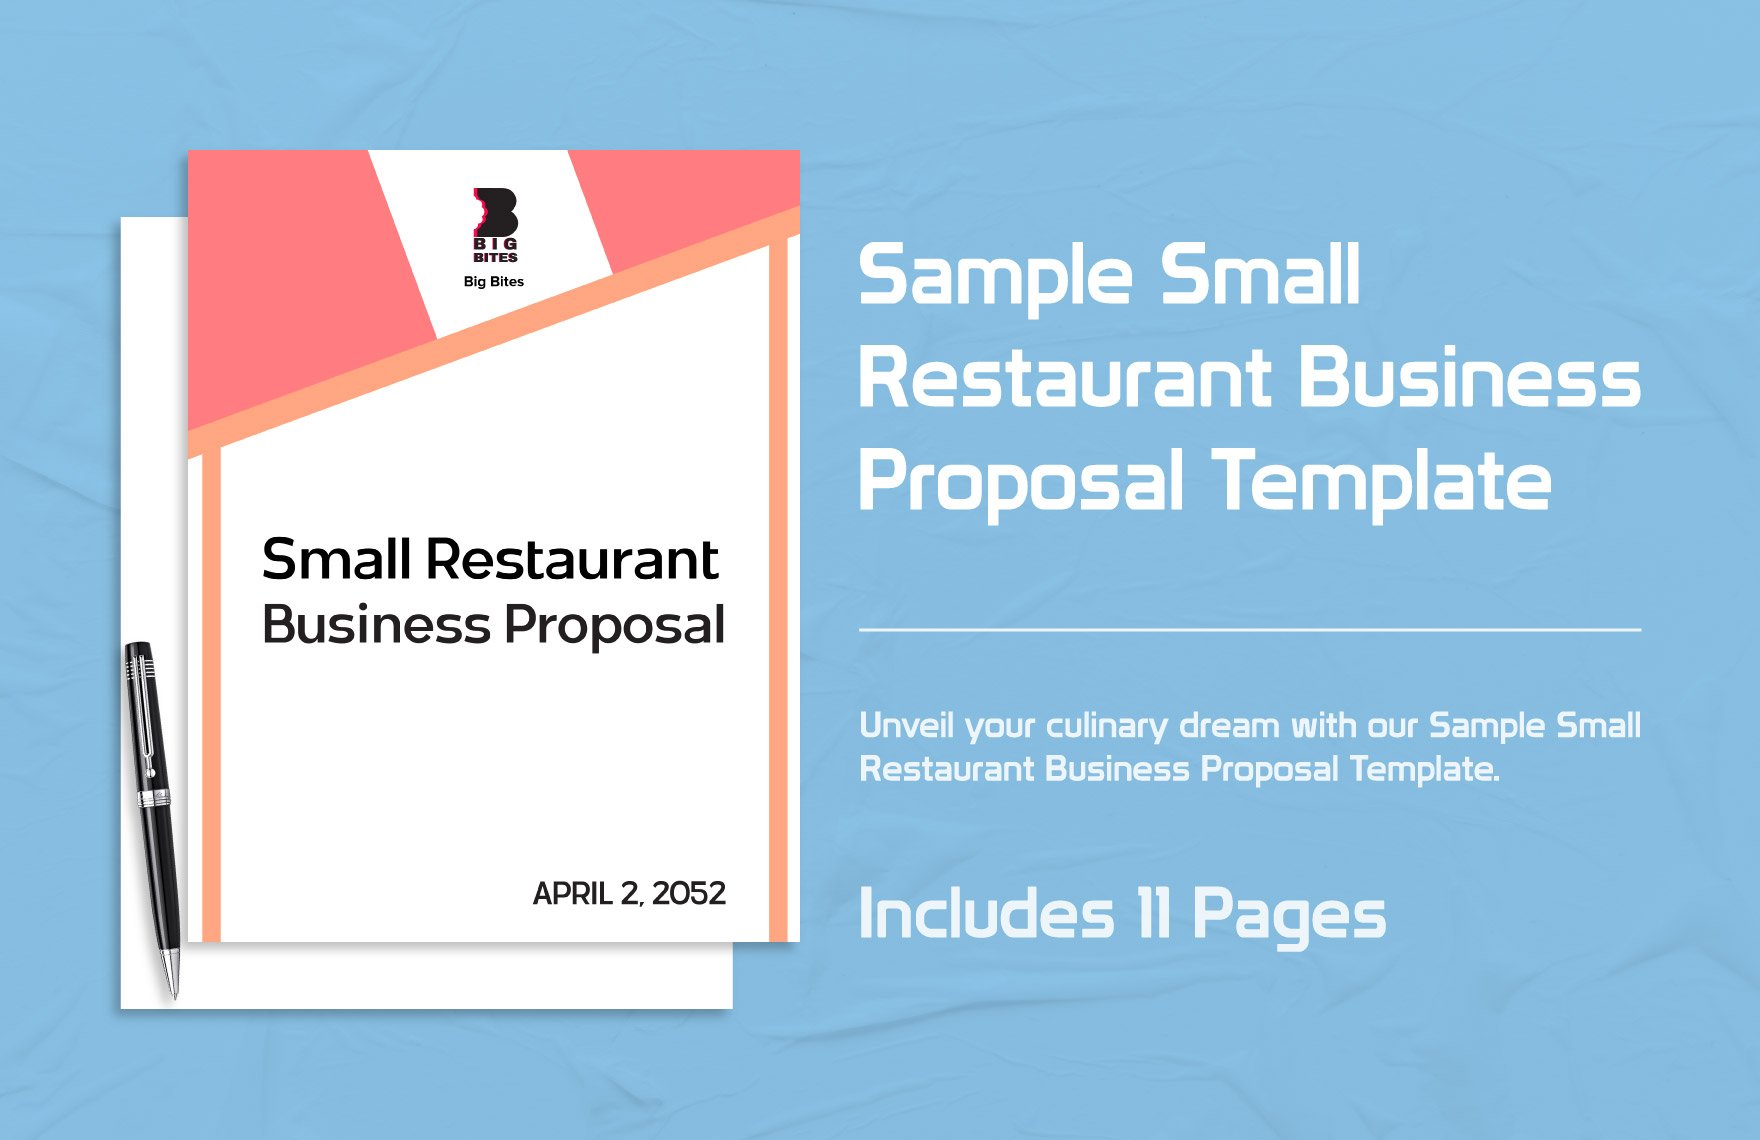 Sample Small Restaurant Business Proposal Template